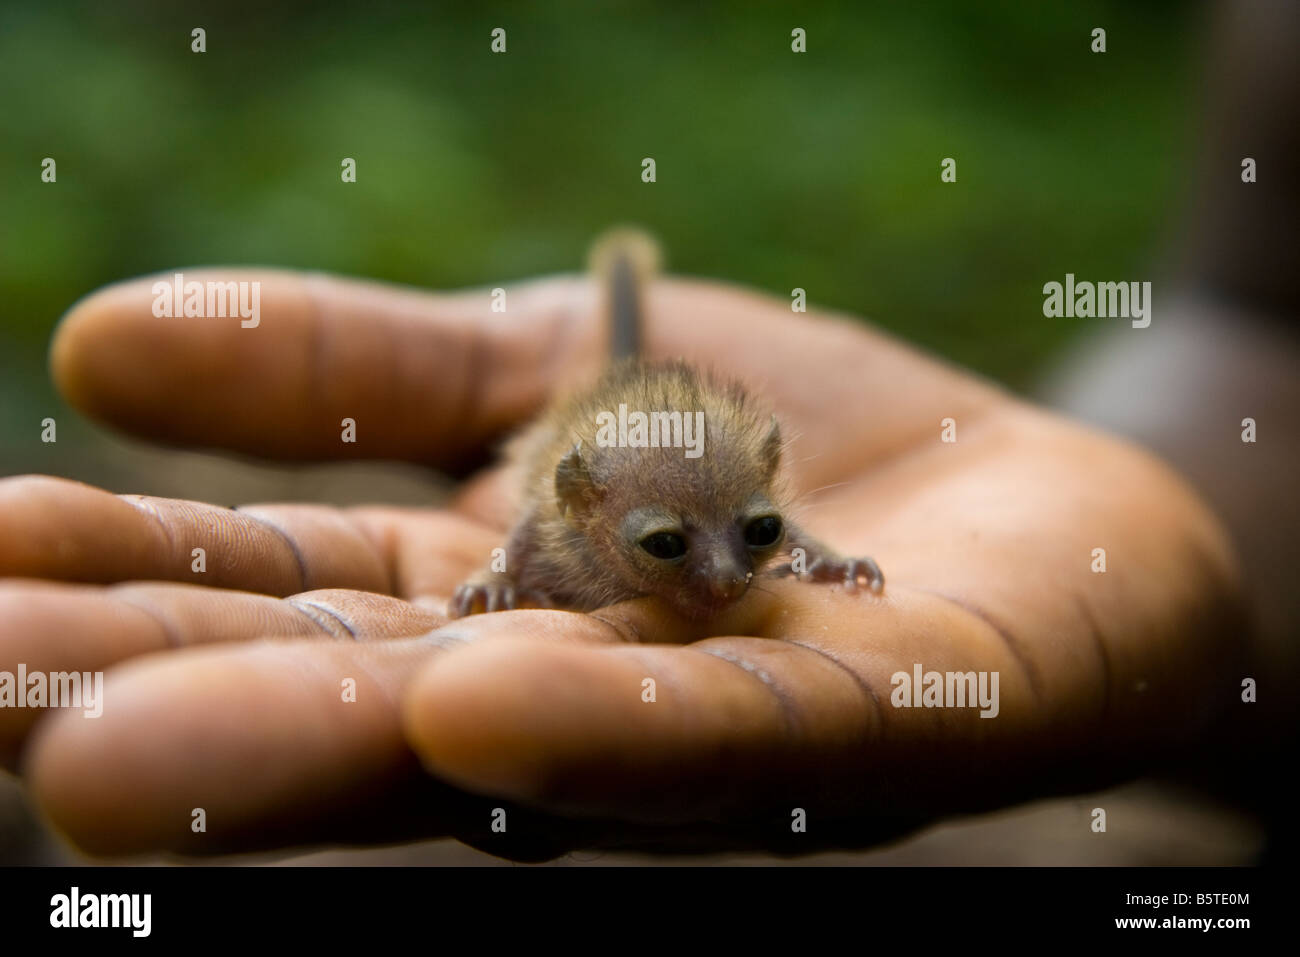 What is believed to be an infant galago or bushbaby fallen to the ground in Togo, West Africa Stock Photo